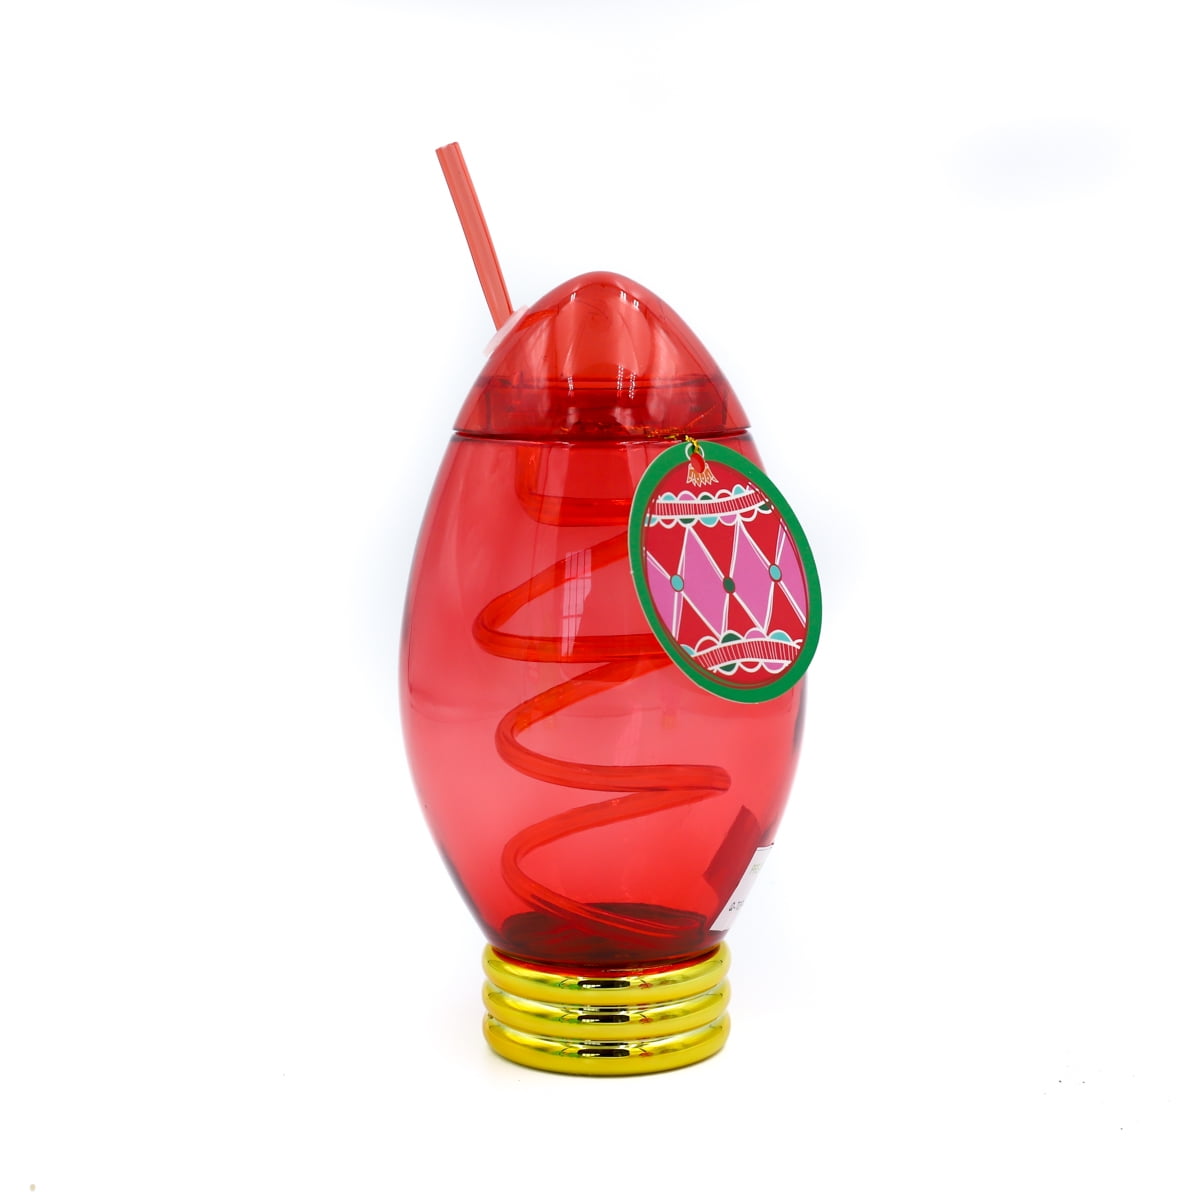 1pc, Christmas Tumbler With Micro-landscape Lid And Straw, Led Light Up  Water Bottle, Double Walled Plastic Water Cups, Summer Winter Drinkware,  Travel Accessories, Christmas Gifts, Free Shipping For New Users